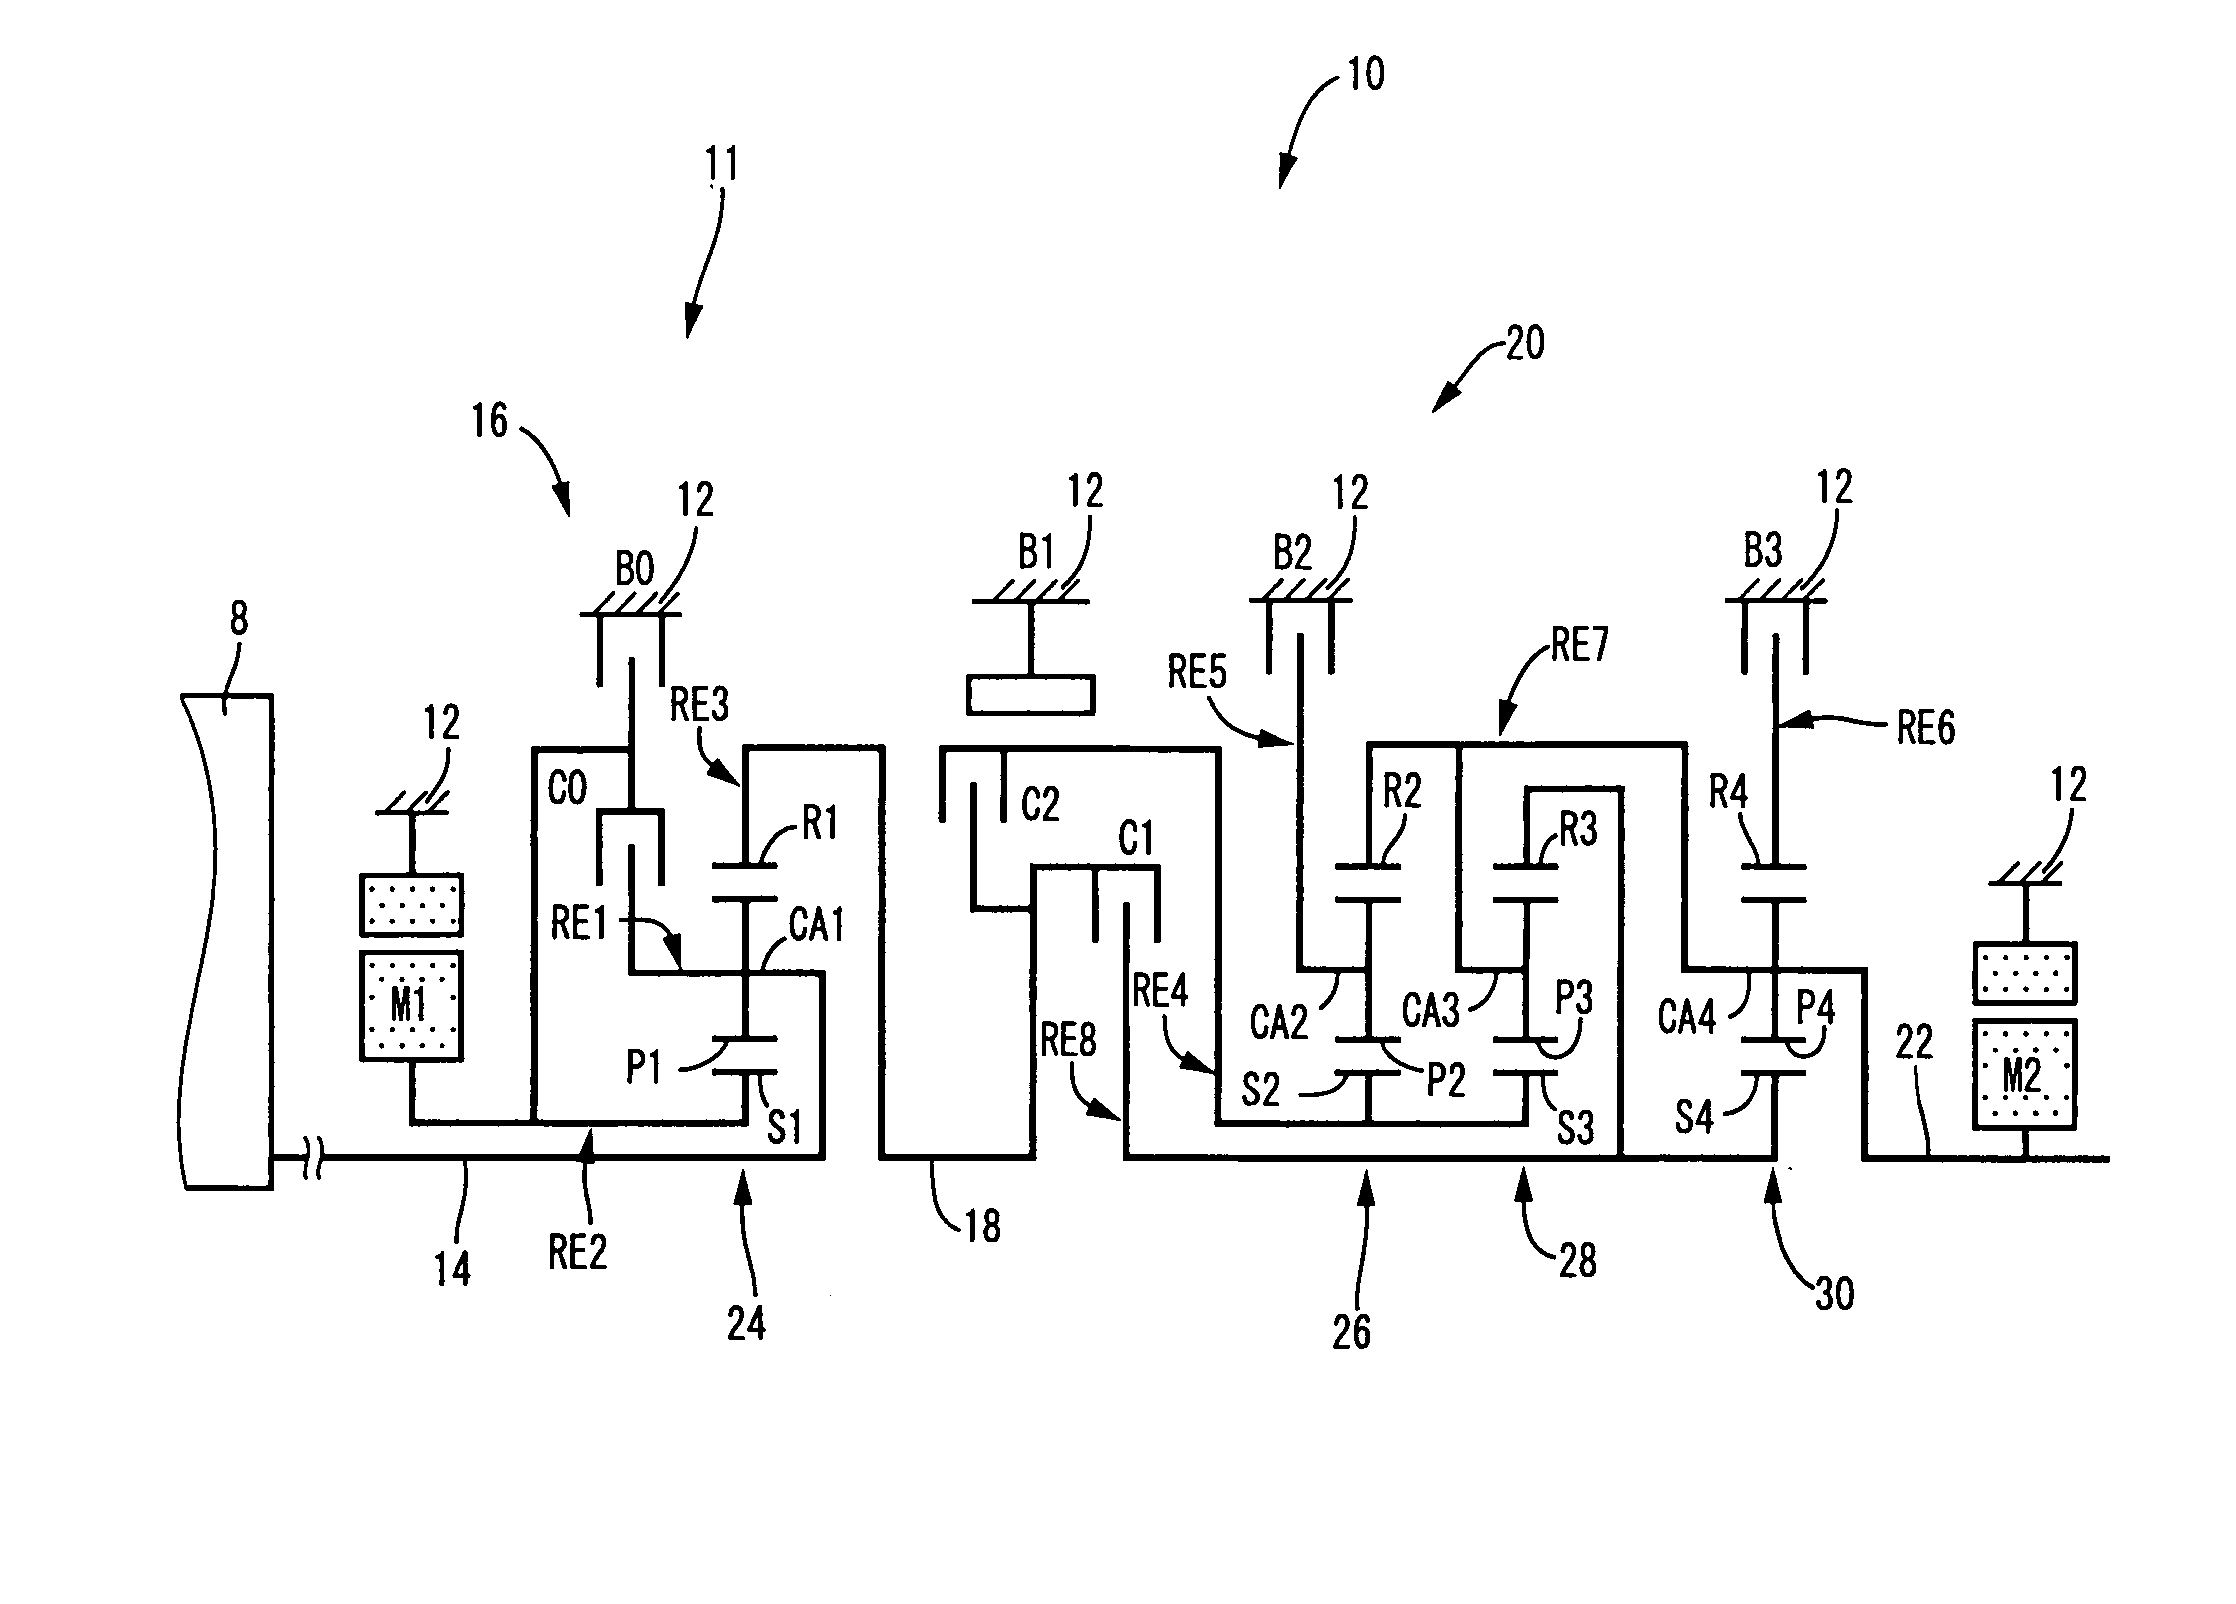 Controller apparatus for vehicular device system